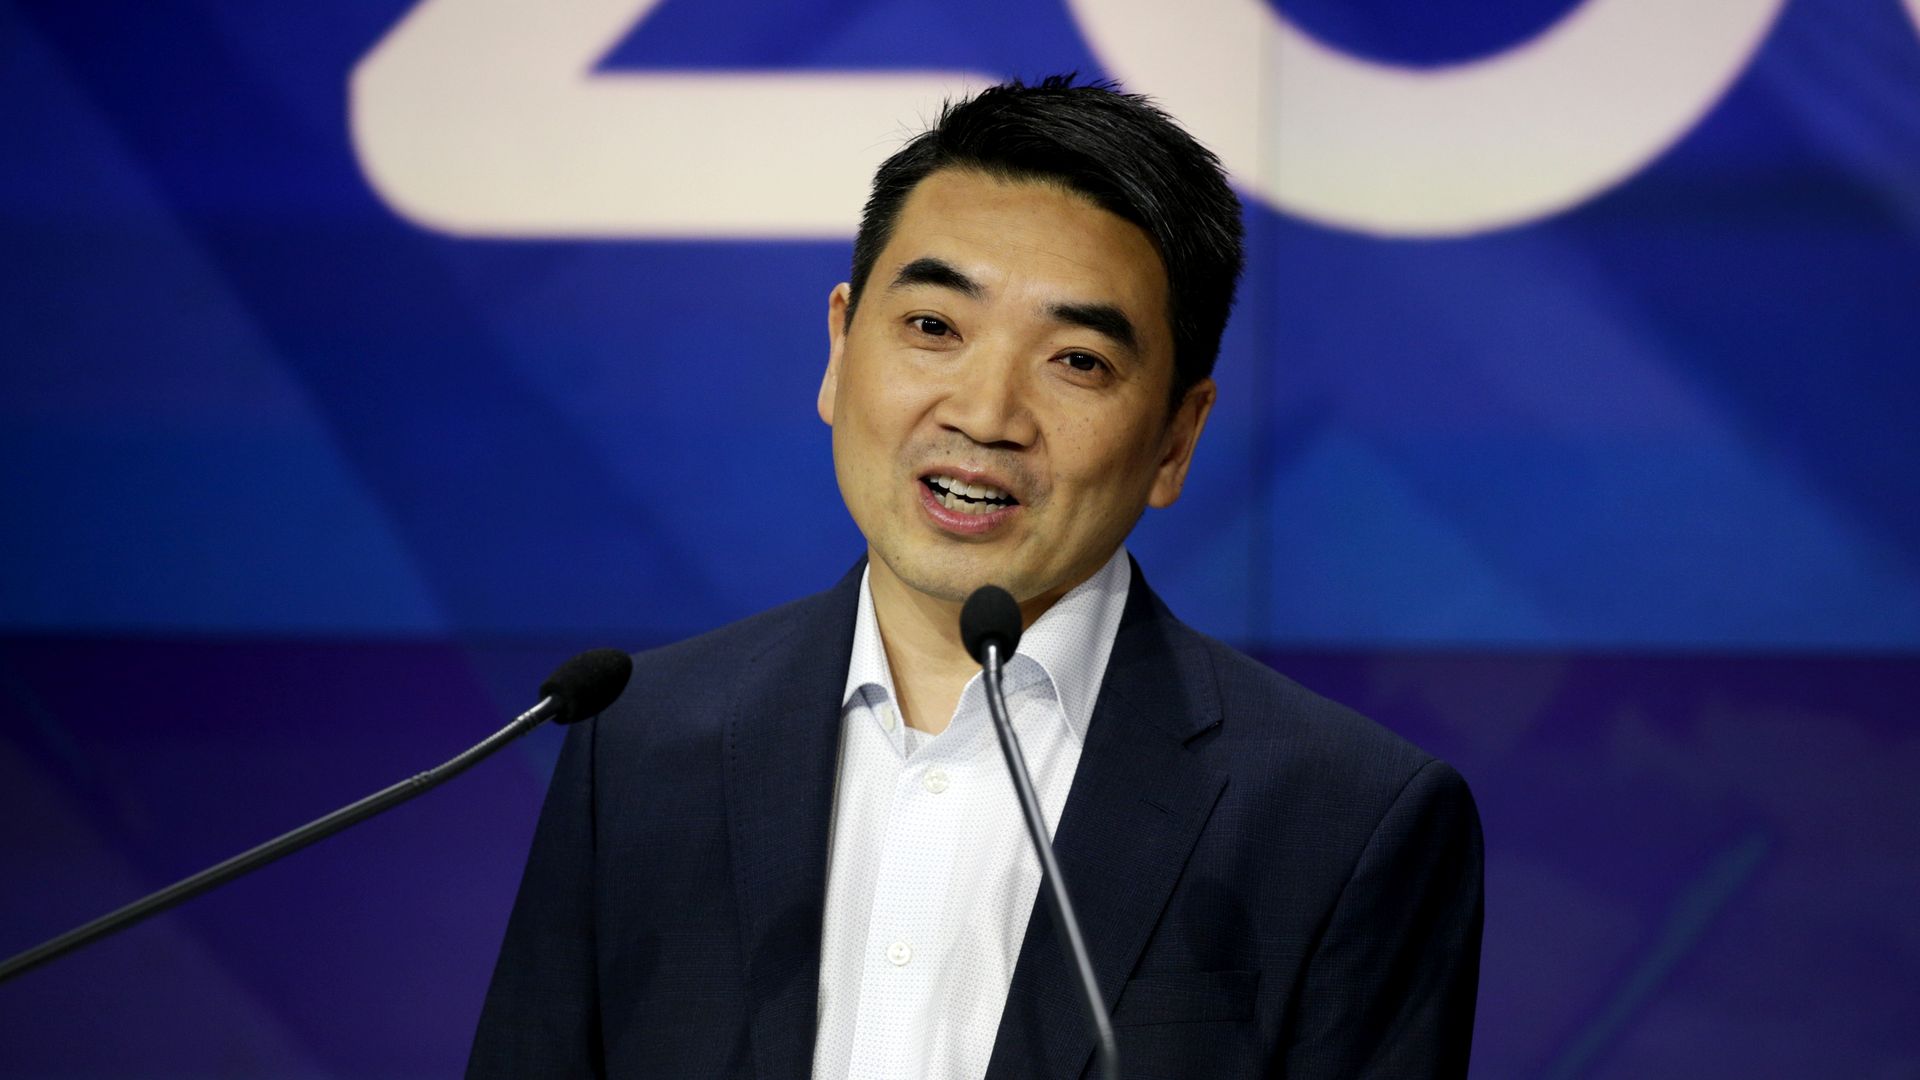 Zoom founder Eric Yuan speaks before the Nasdaq opening bell ceremony on April 18, 2019 in New York City